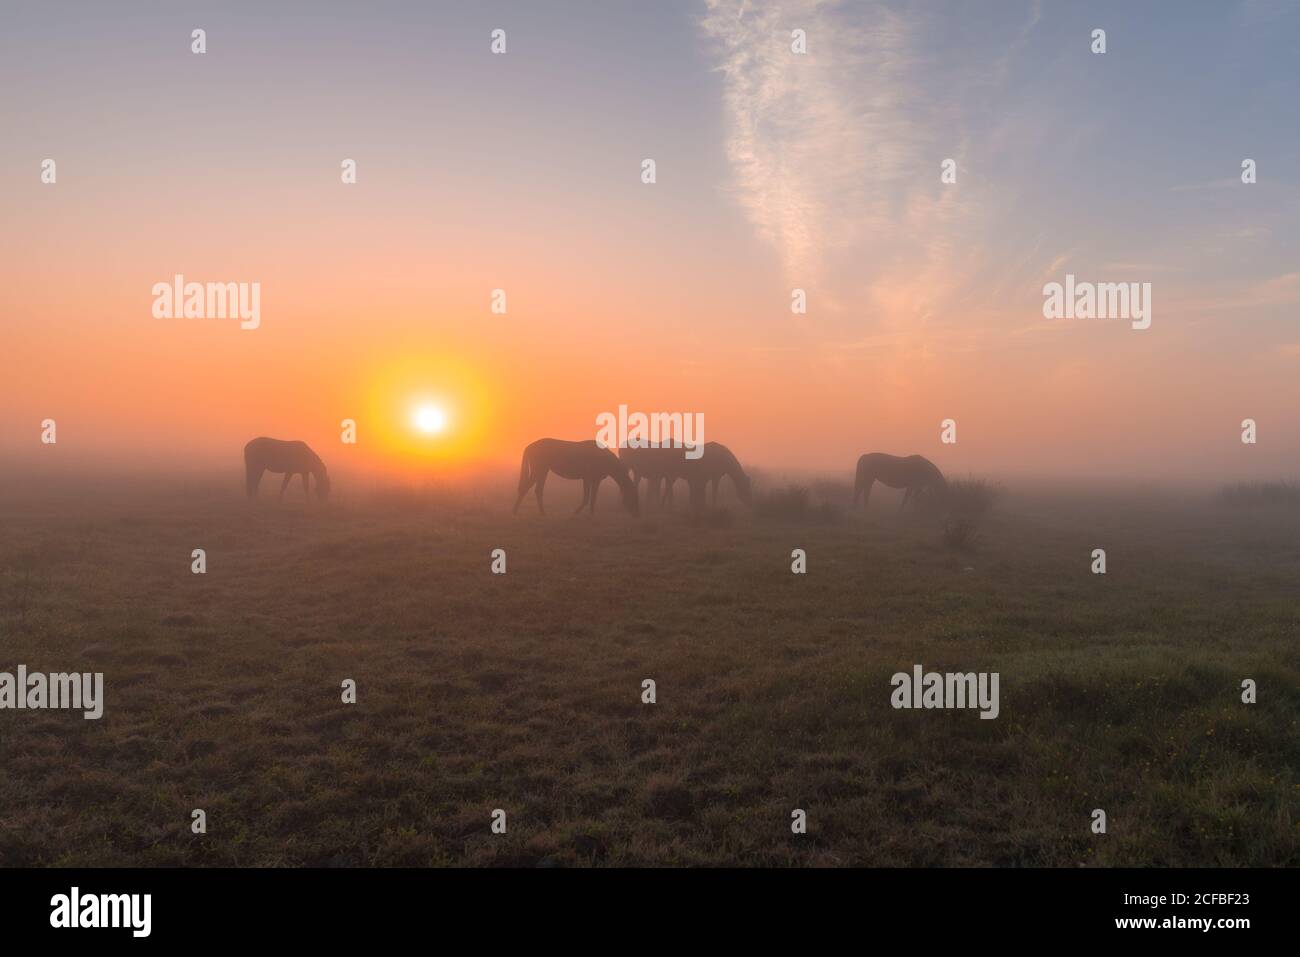 Horses graze on a dewy pasture a misty morning in the sunrise, Holl, Denmark, August 14, 2020 Stock Photo